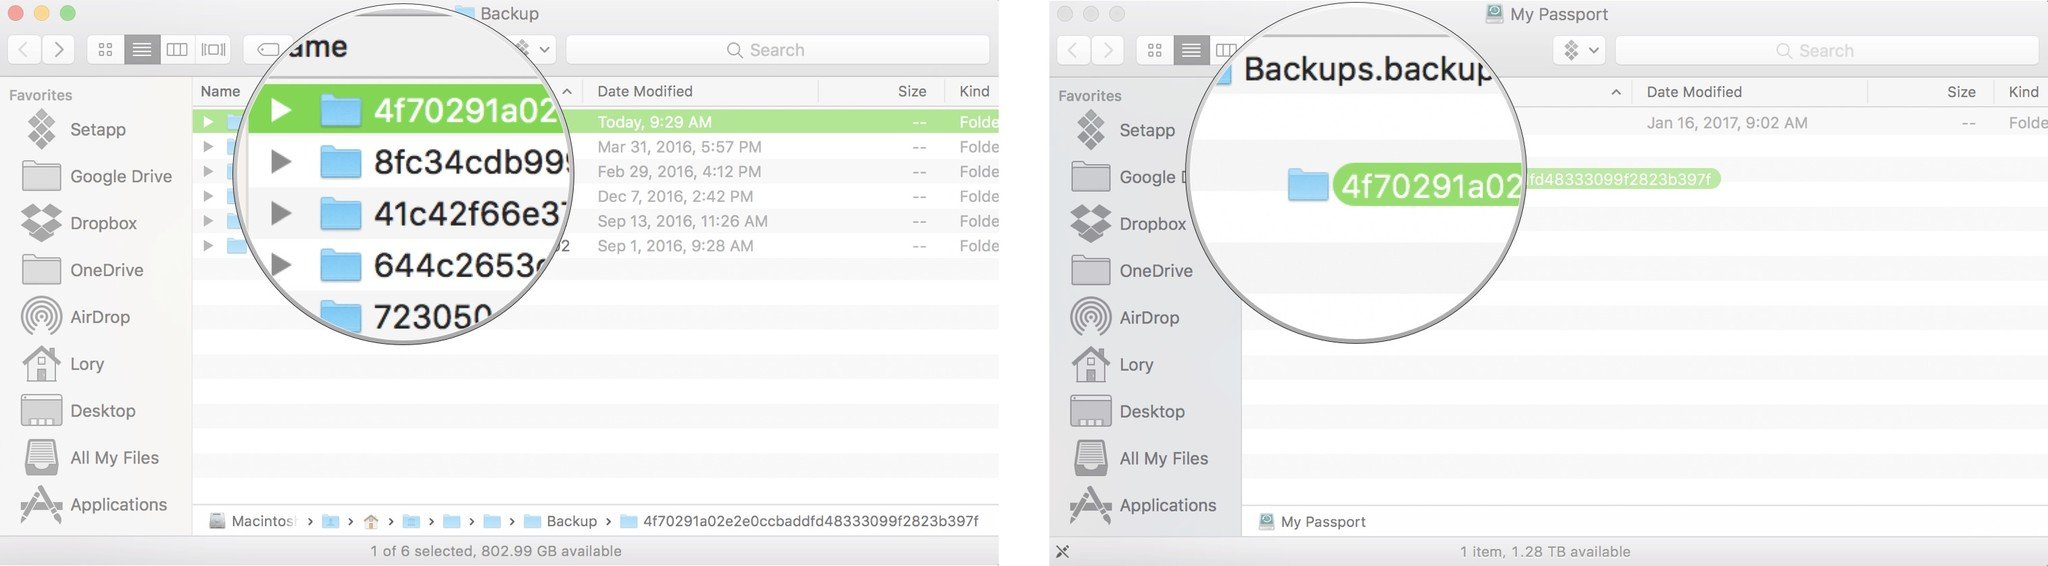 How To Move Your Iphone Or Ipad Backups To An External Hard Drive Imore